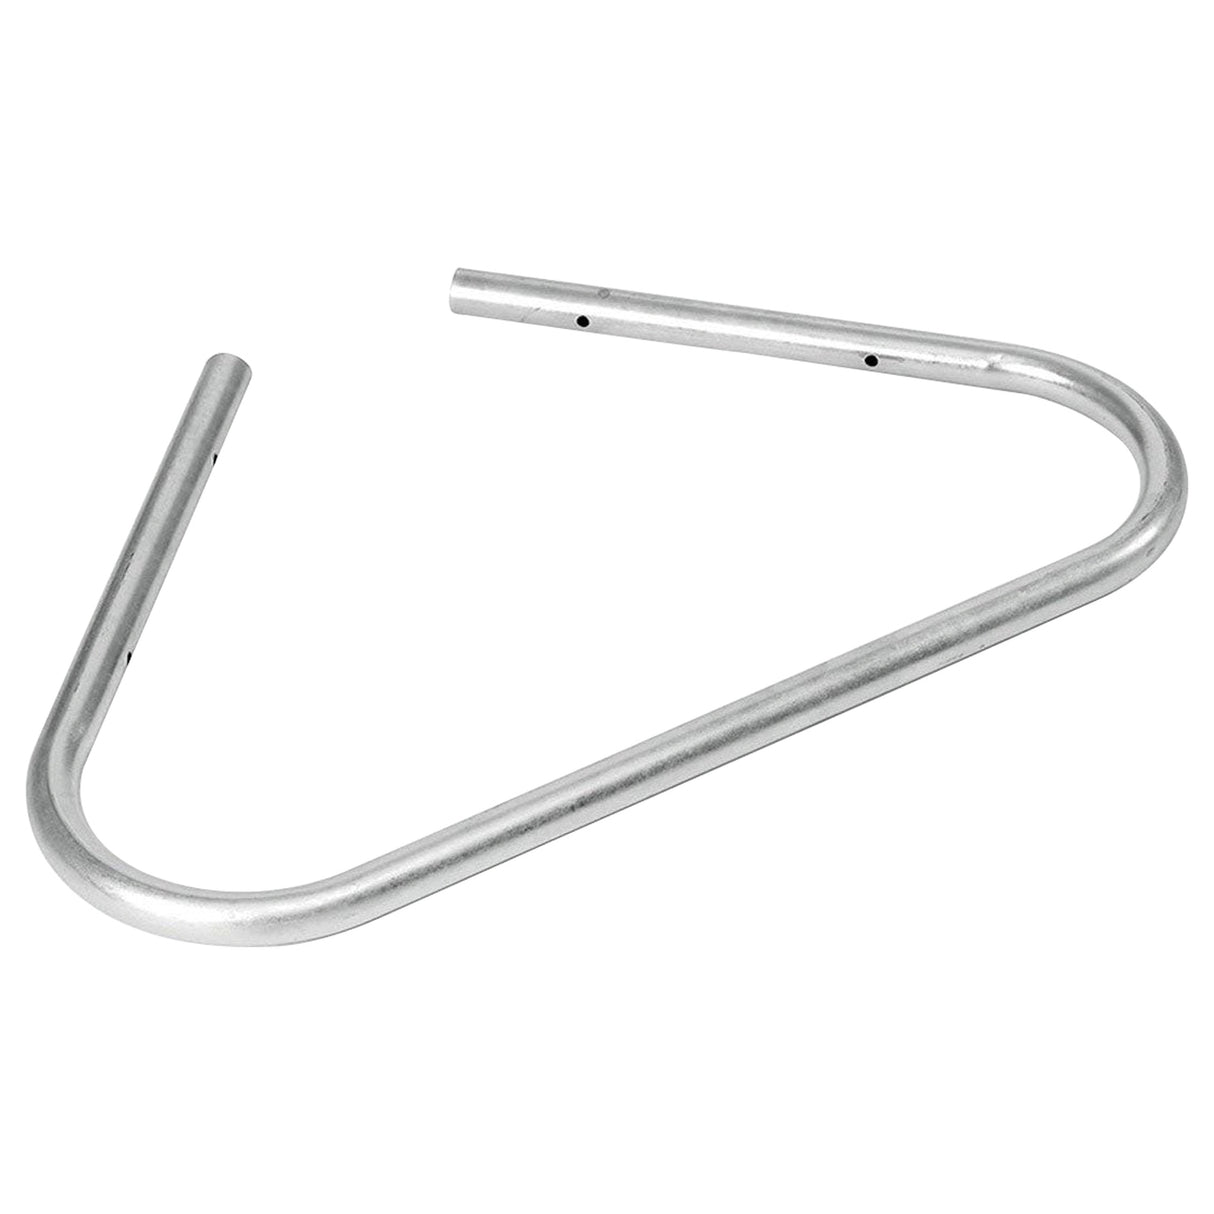 Perry Equestrian Corner Manger Support Bracket with Fixings